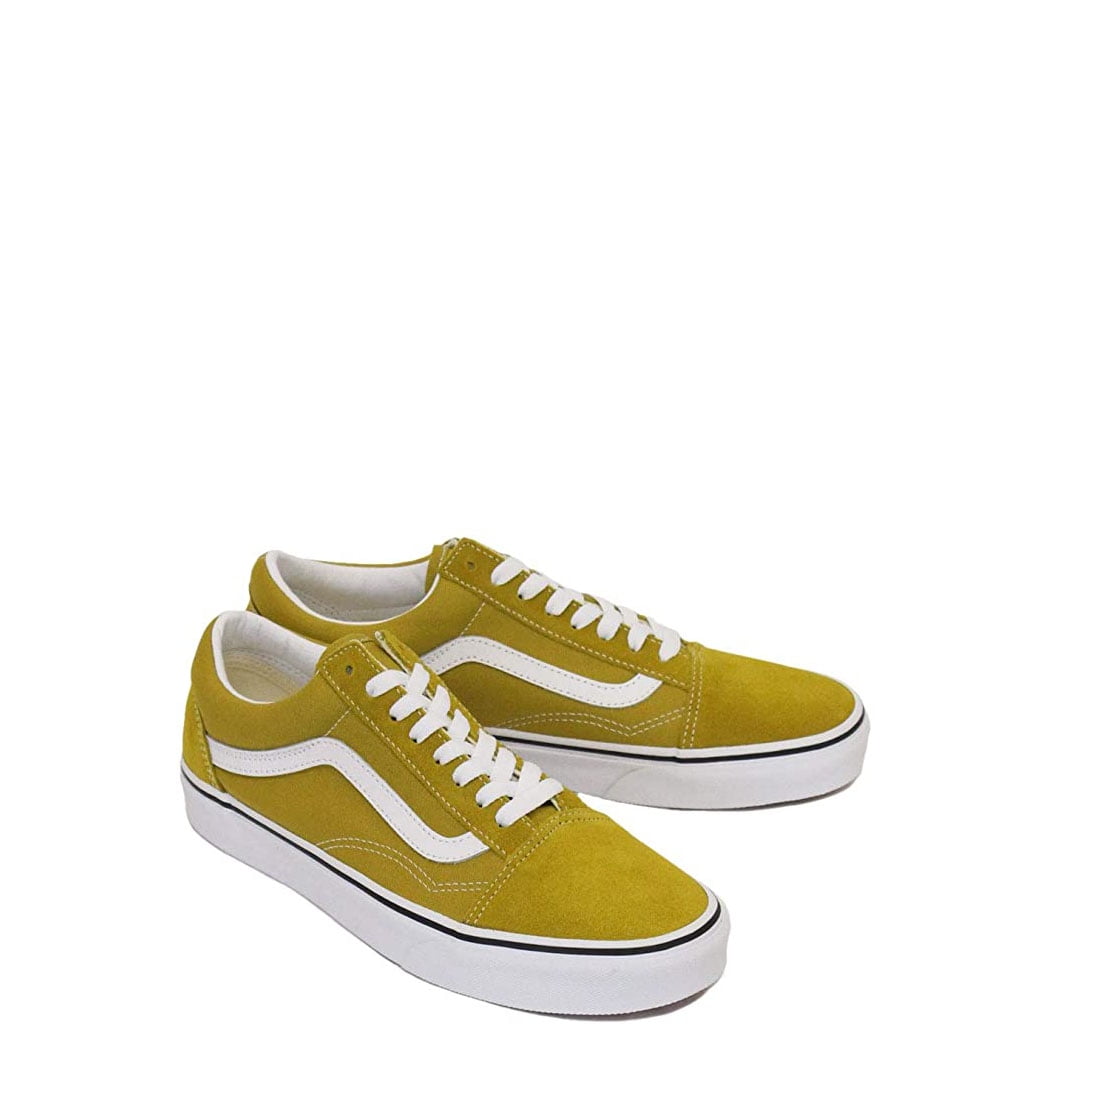 Vans Mens Old Skool Leather Athletic and Training Shoes Green 9 Medium (D)  